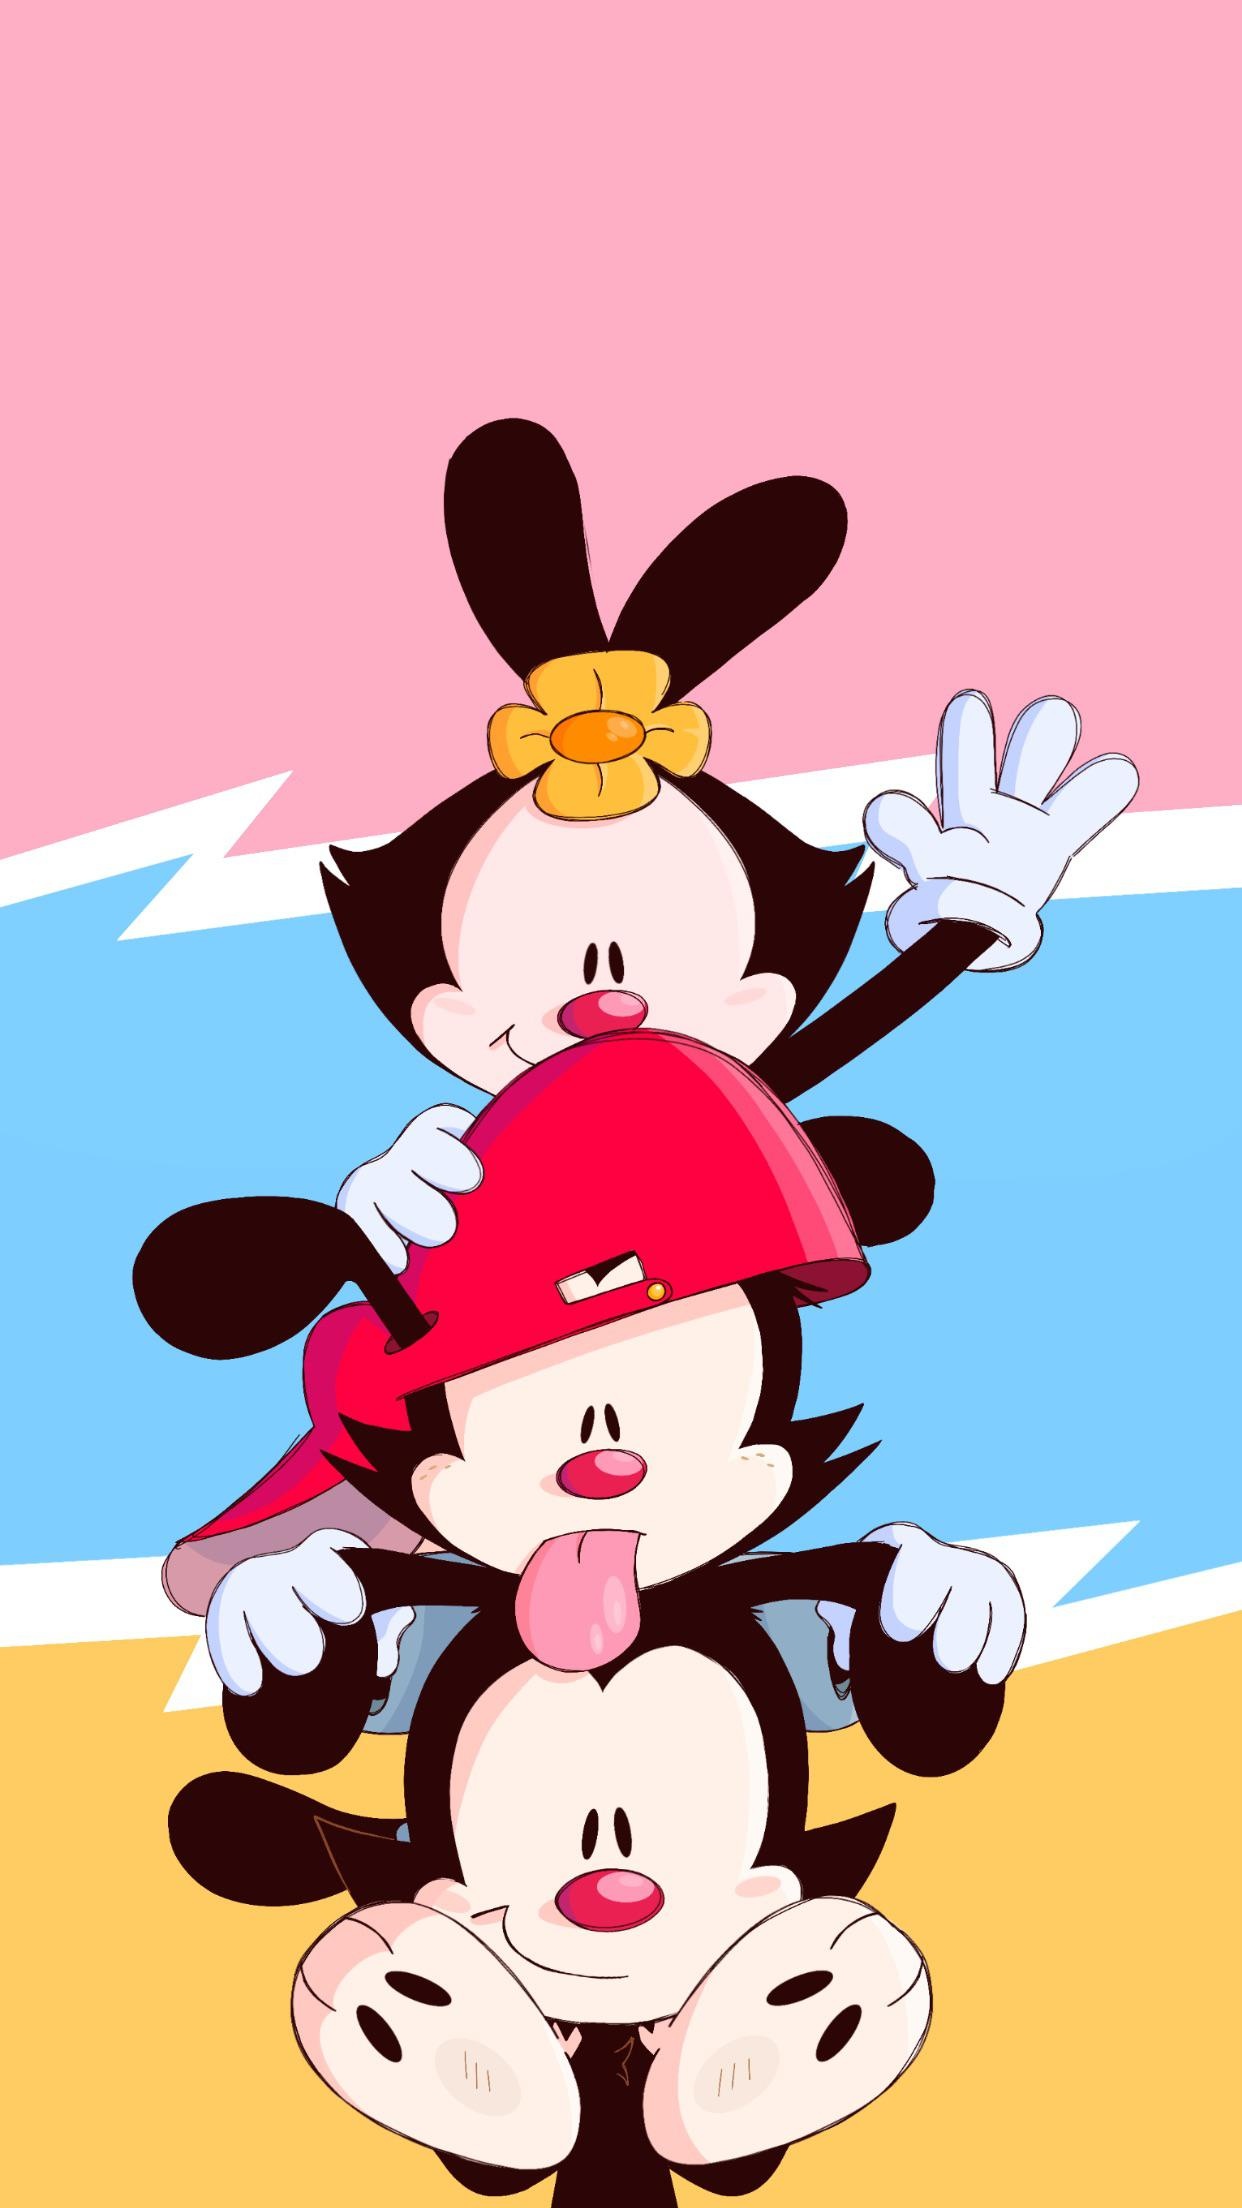 iPhone wallpapers for Animaniacs, Creative fan designs, 1250x2210 HD Handy